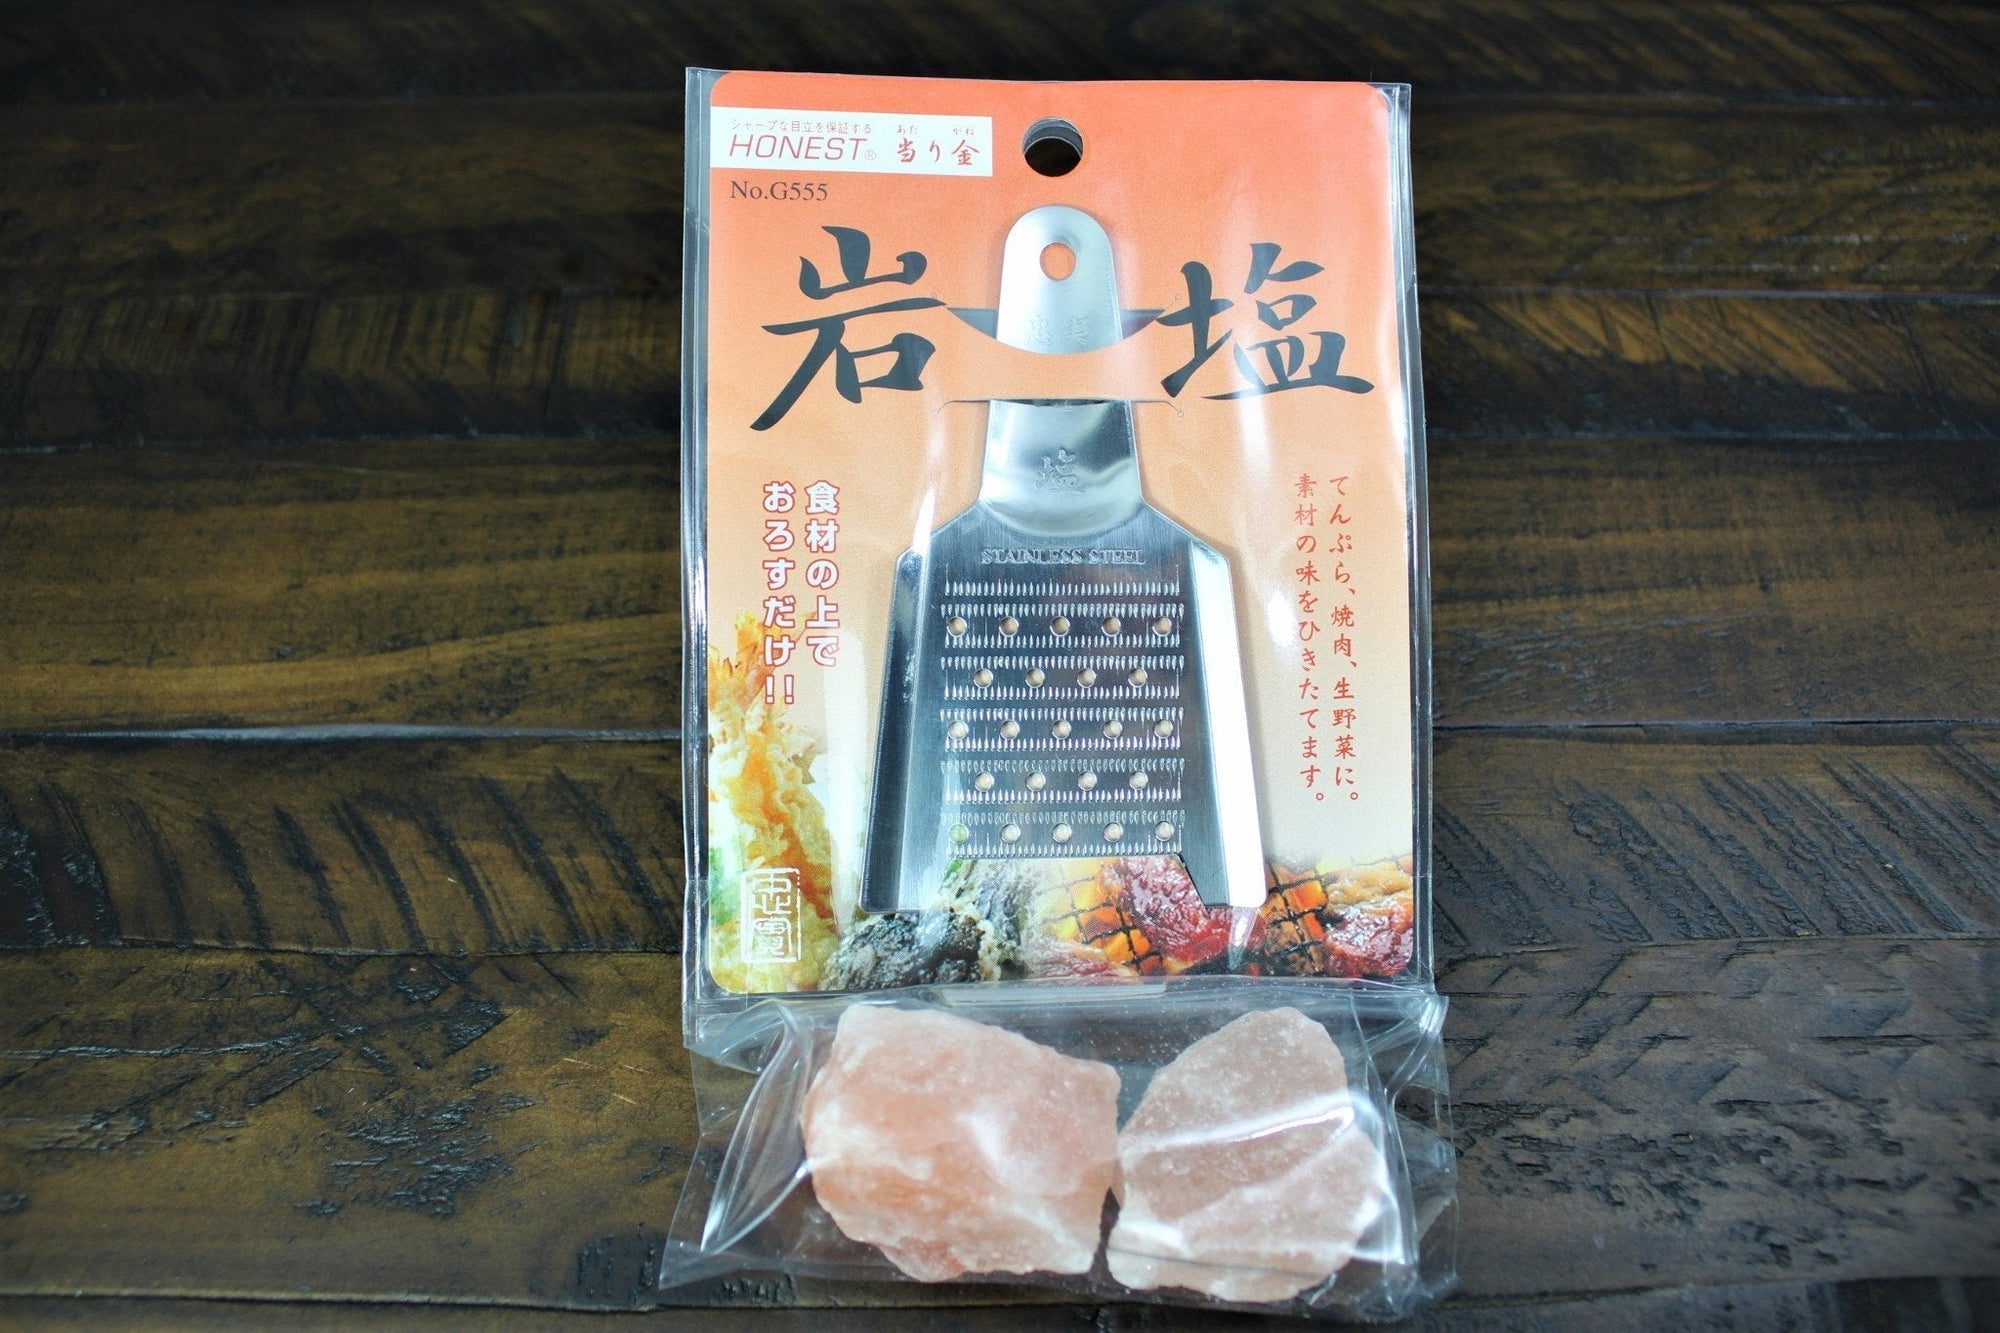 Accessories - Stainless Steel Japanese Grater / Oroshigane With Rock Salt